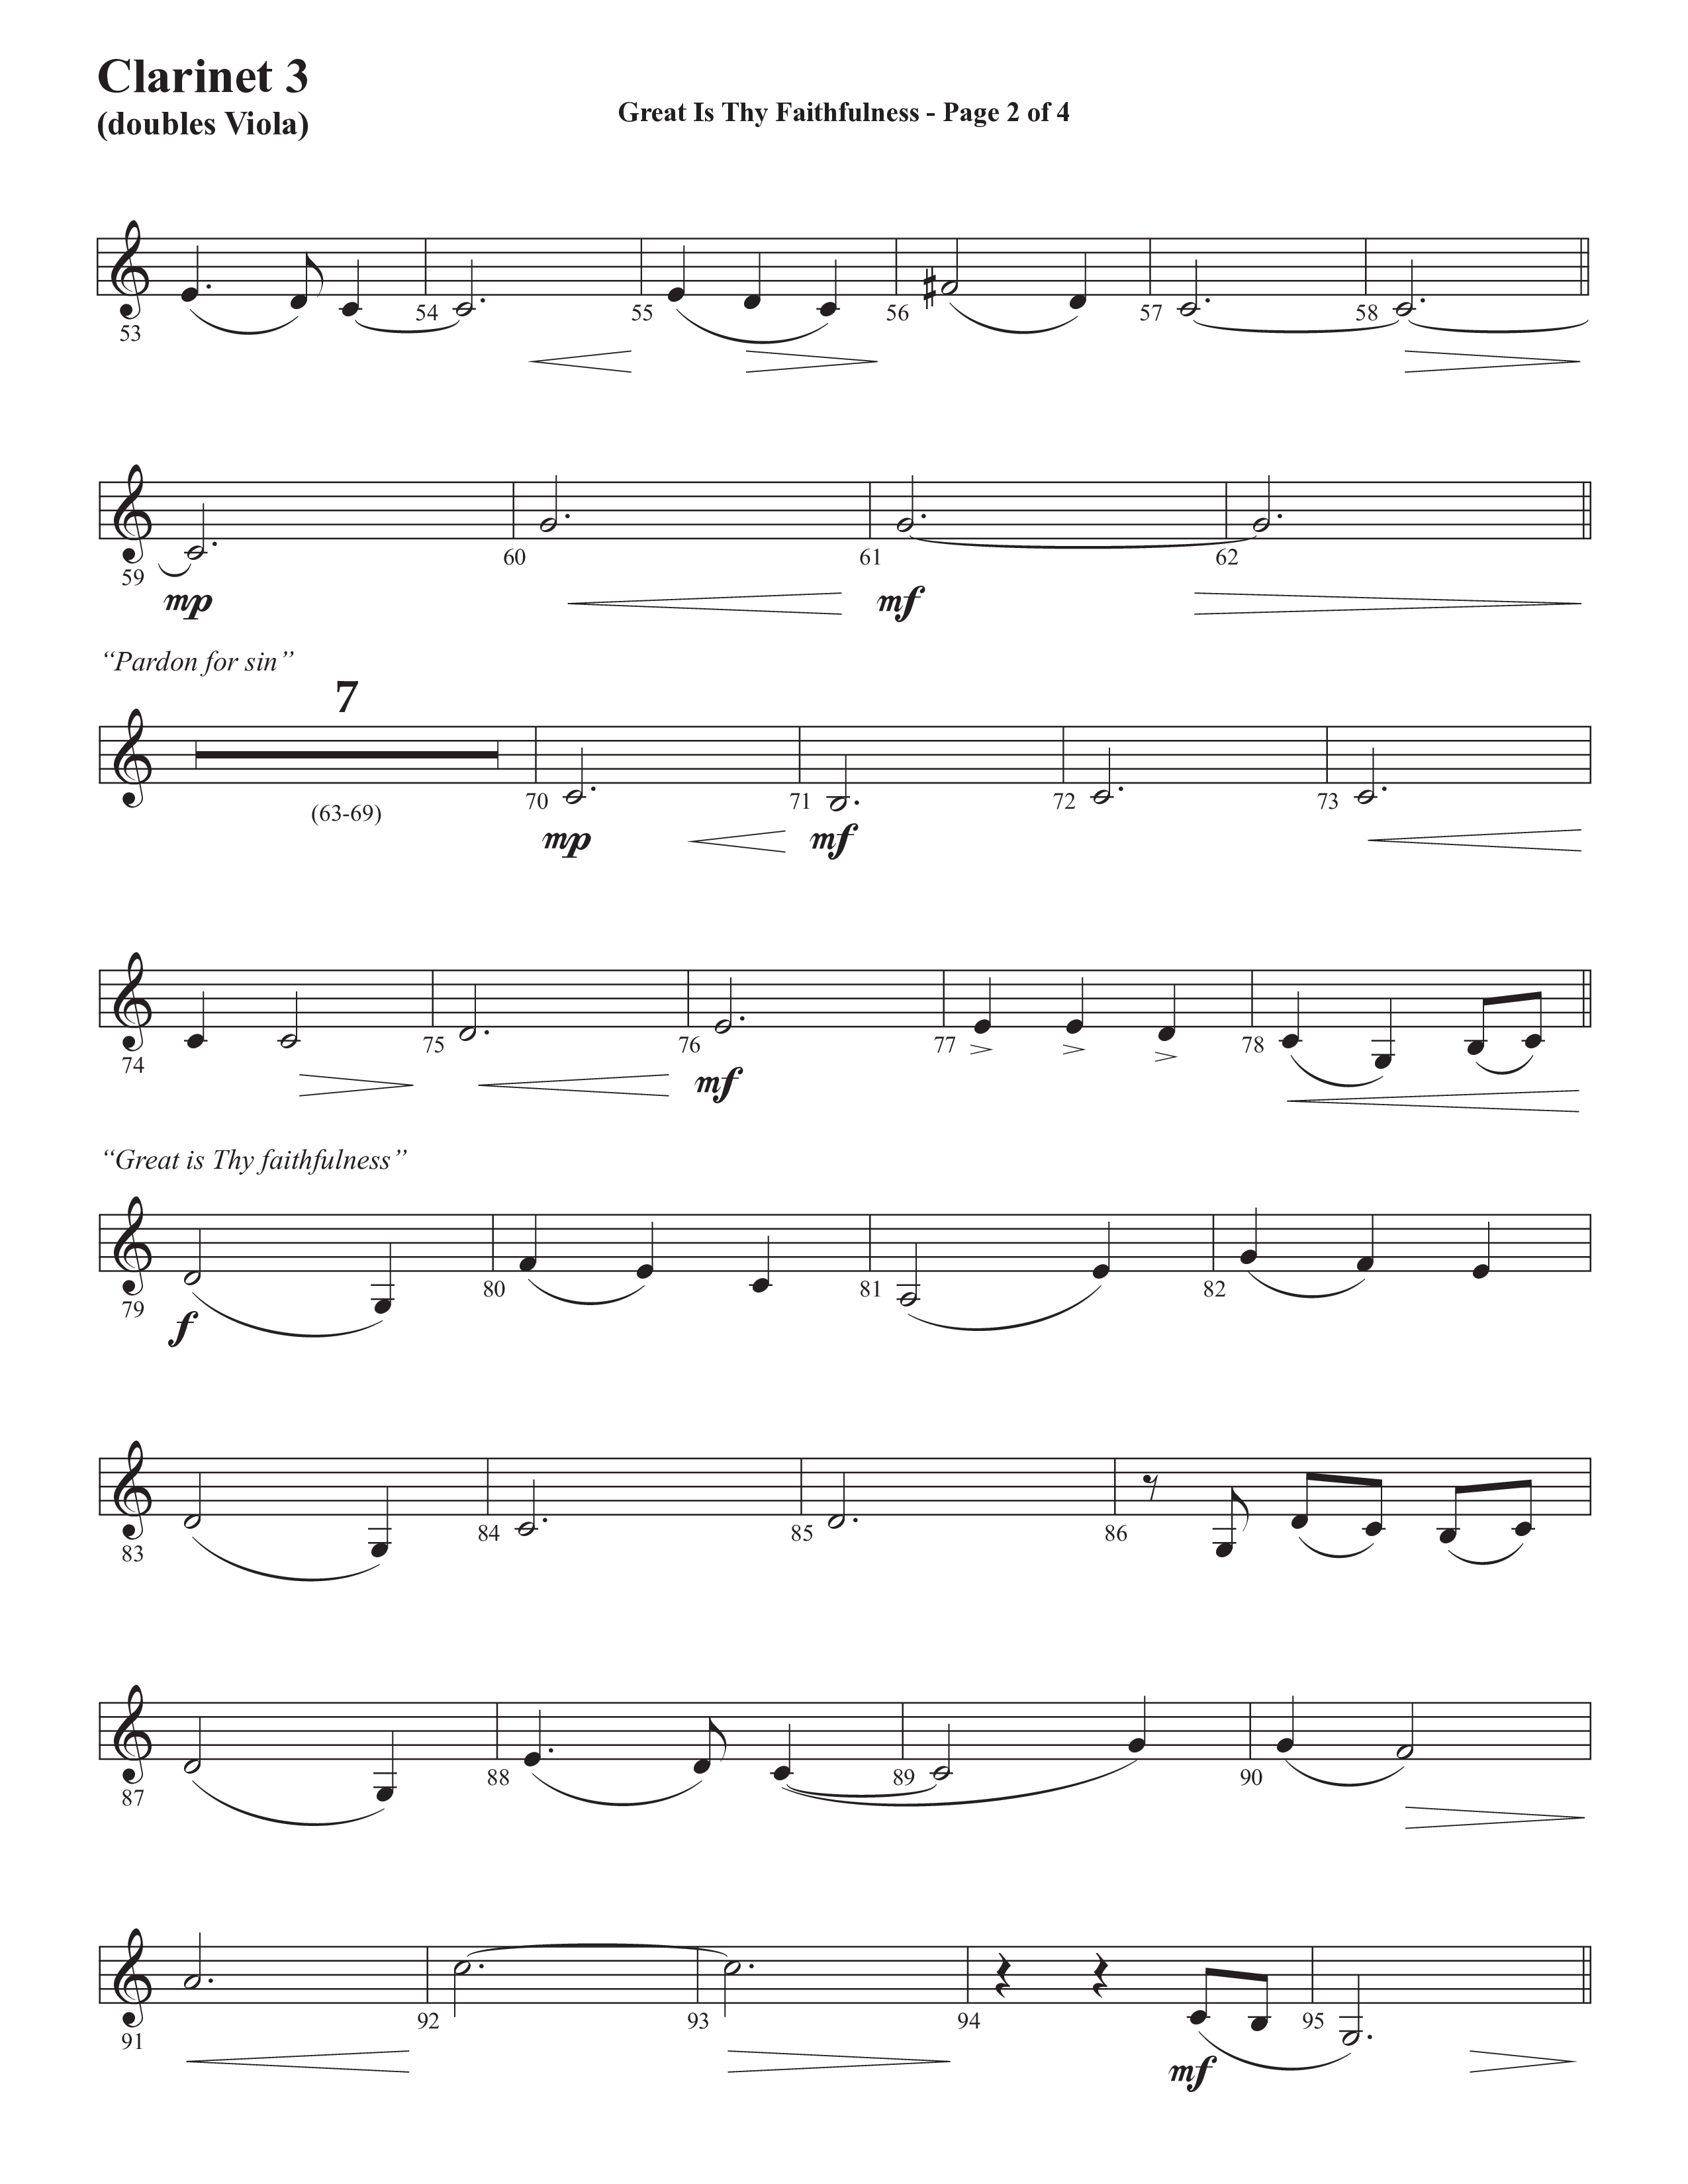 Great Is Thy Faithfulness (You Are Great) (Choral Anthem SATB) Clarinet 3 (Semsen Music / Arr. John Bolin / Orch. David Shipps)